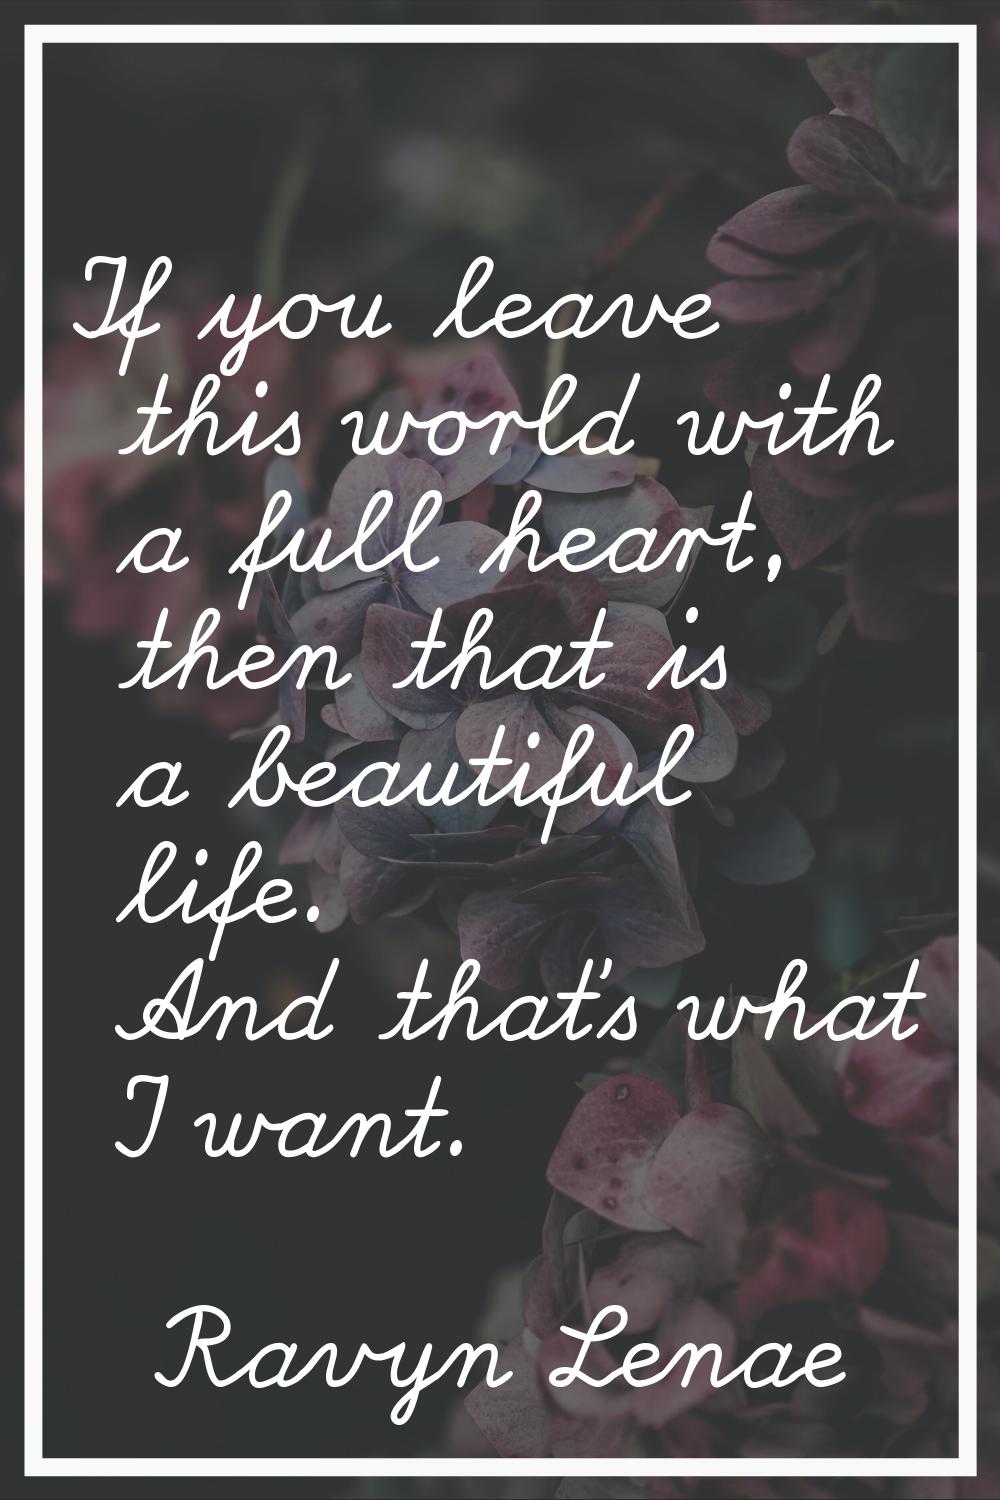 If you leave this world with a full heart, then that is a beautiful life. And that's what I want.